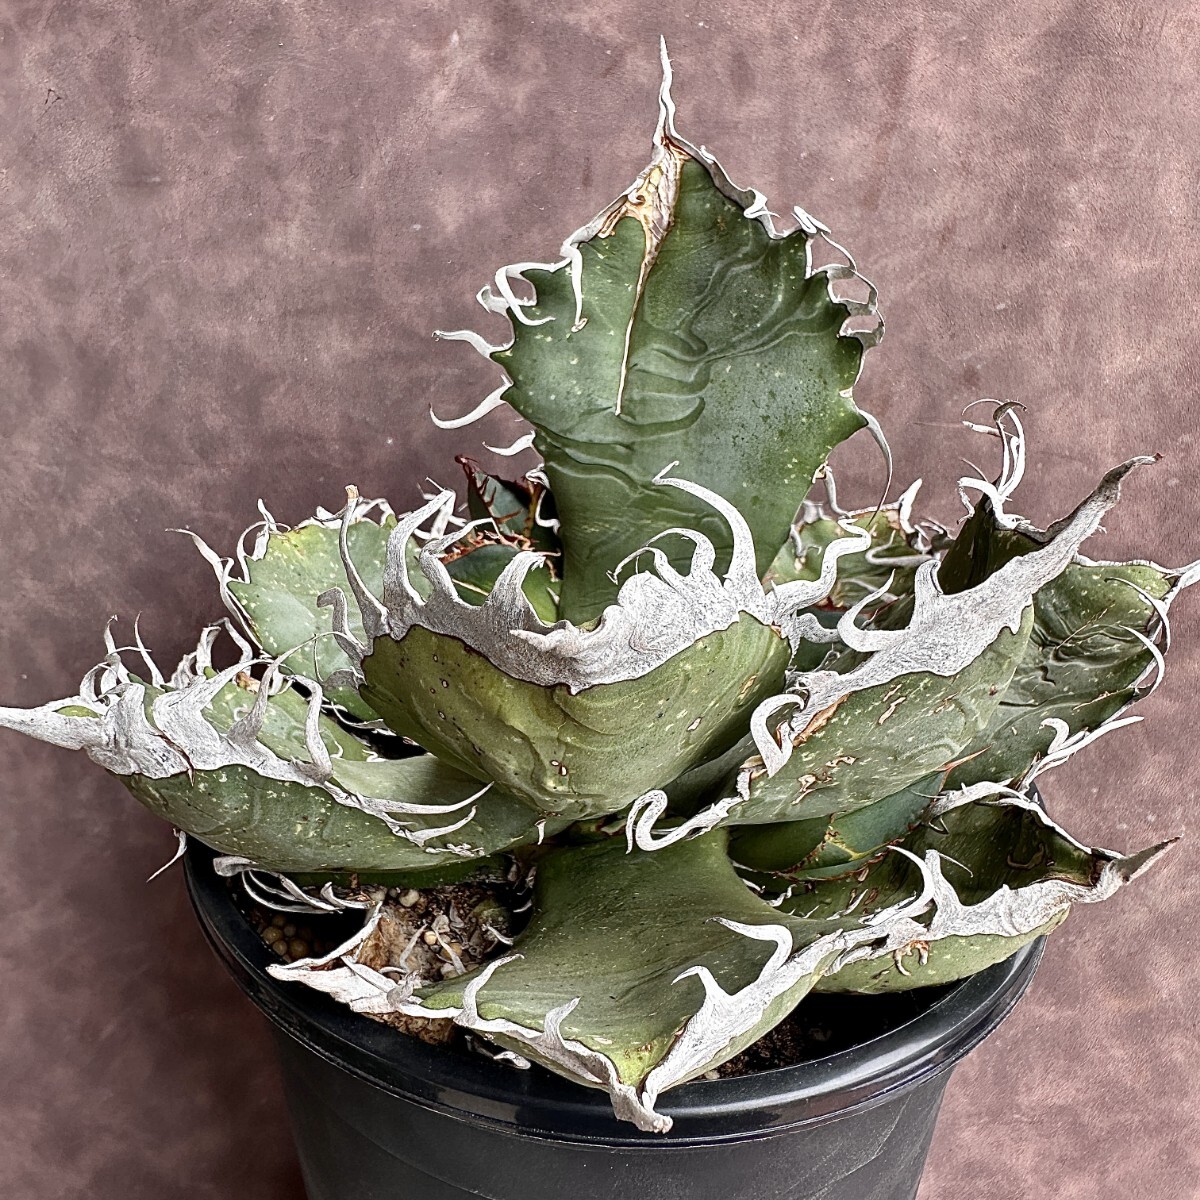 [Lj_plants]W134 limitation special selection stock agave chitanota less name a little over white ... madness . rare stock direct series . stock 1 stock [.... demon goods kind ] name none 